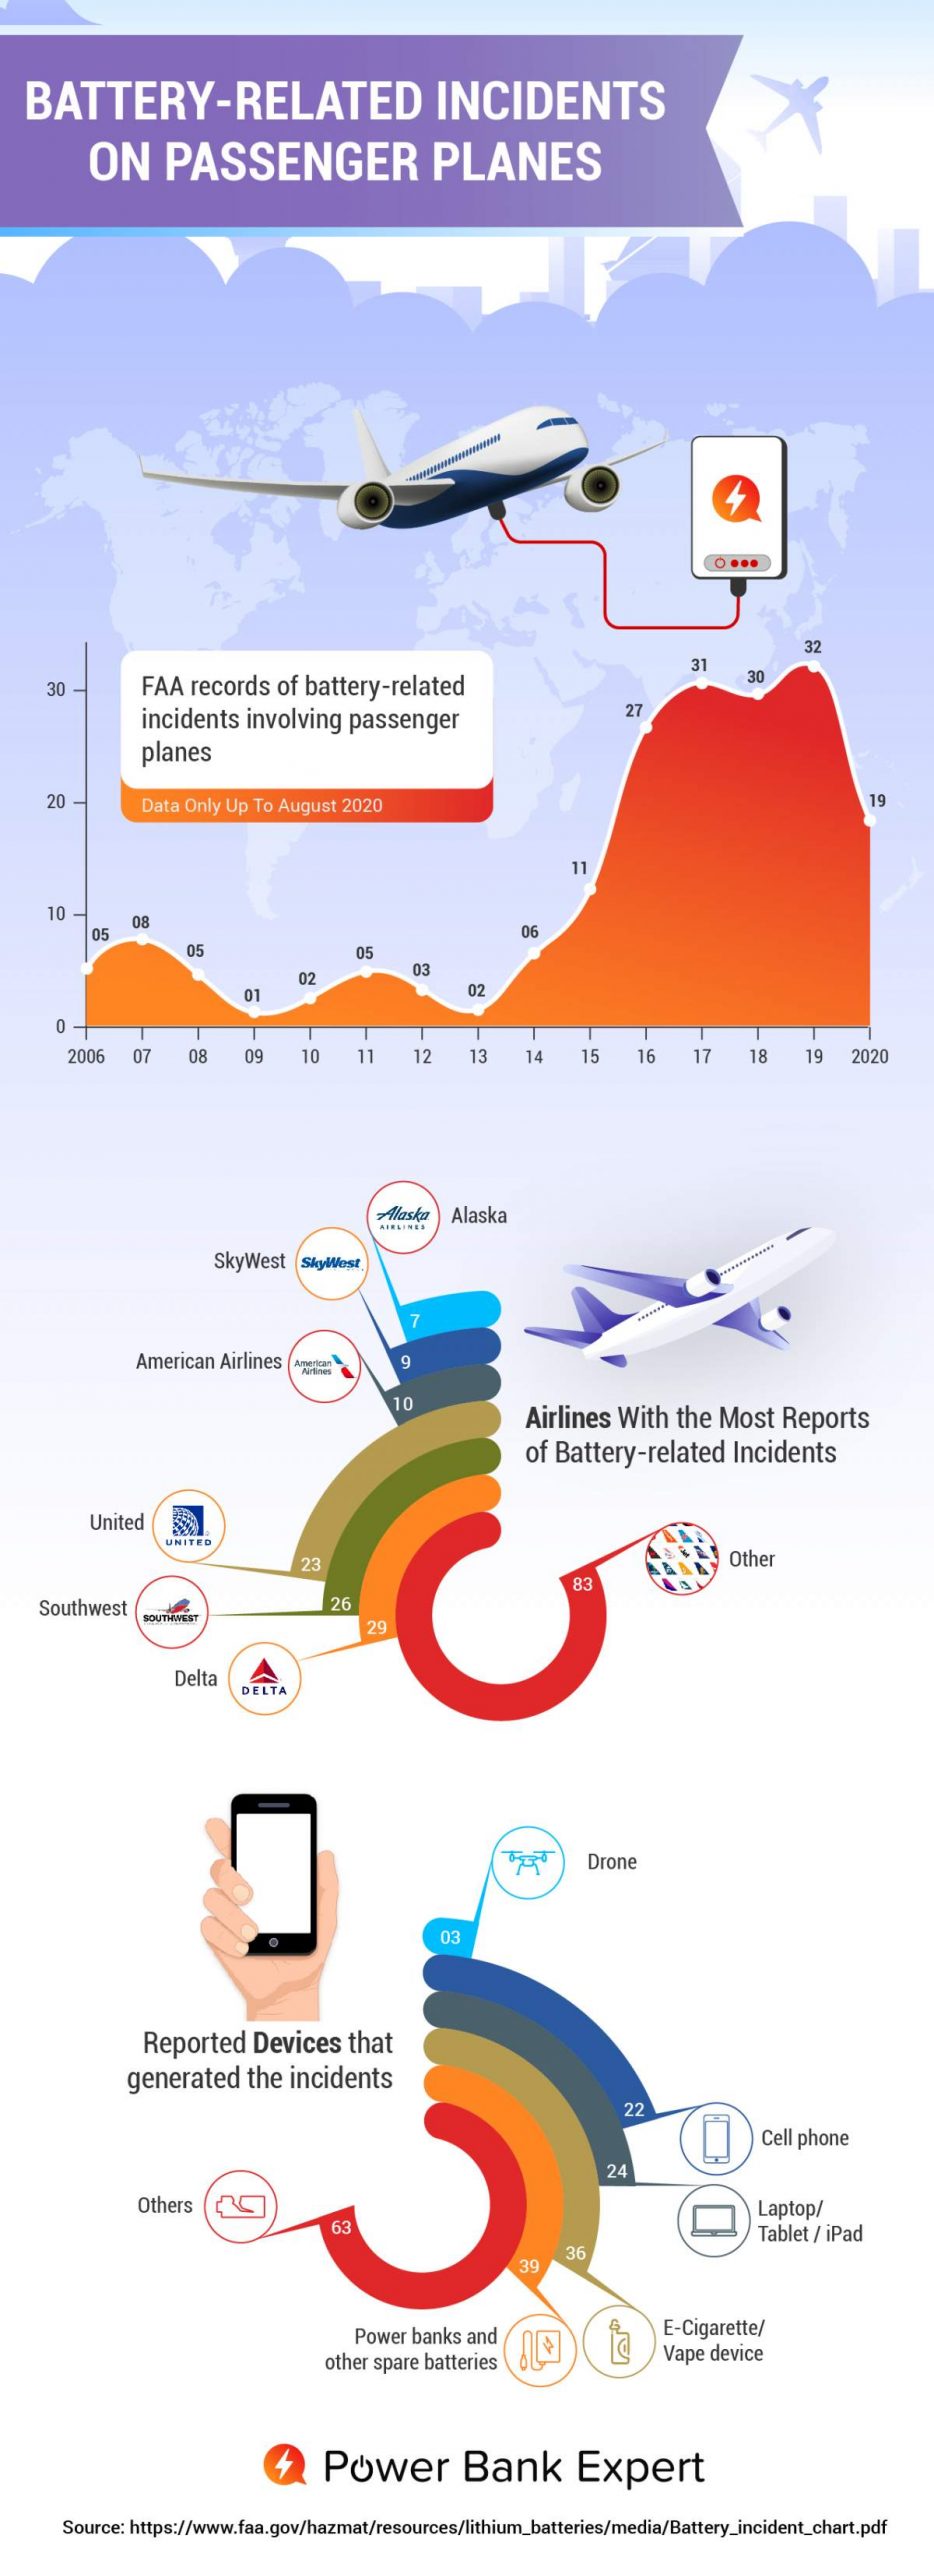 Battery-related incidents on passenger planes